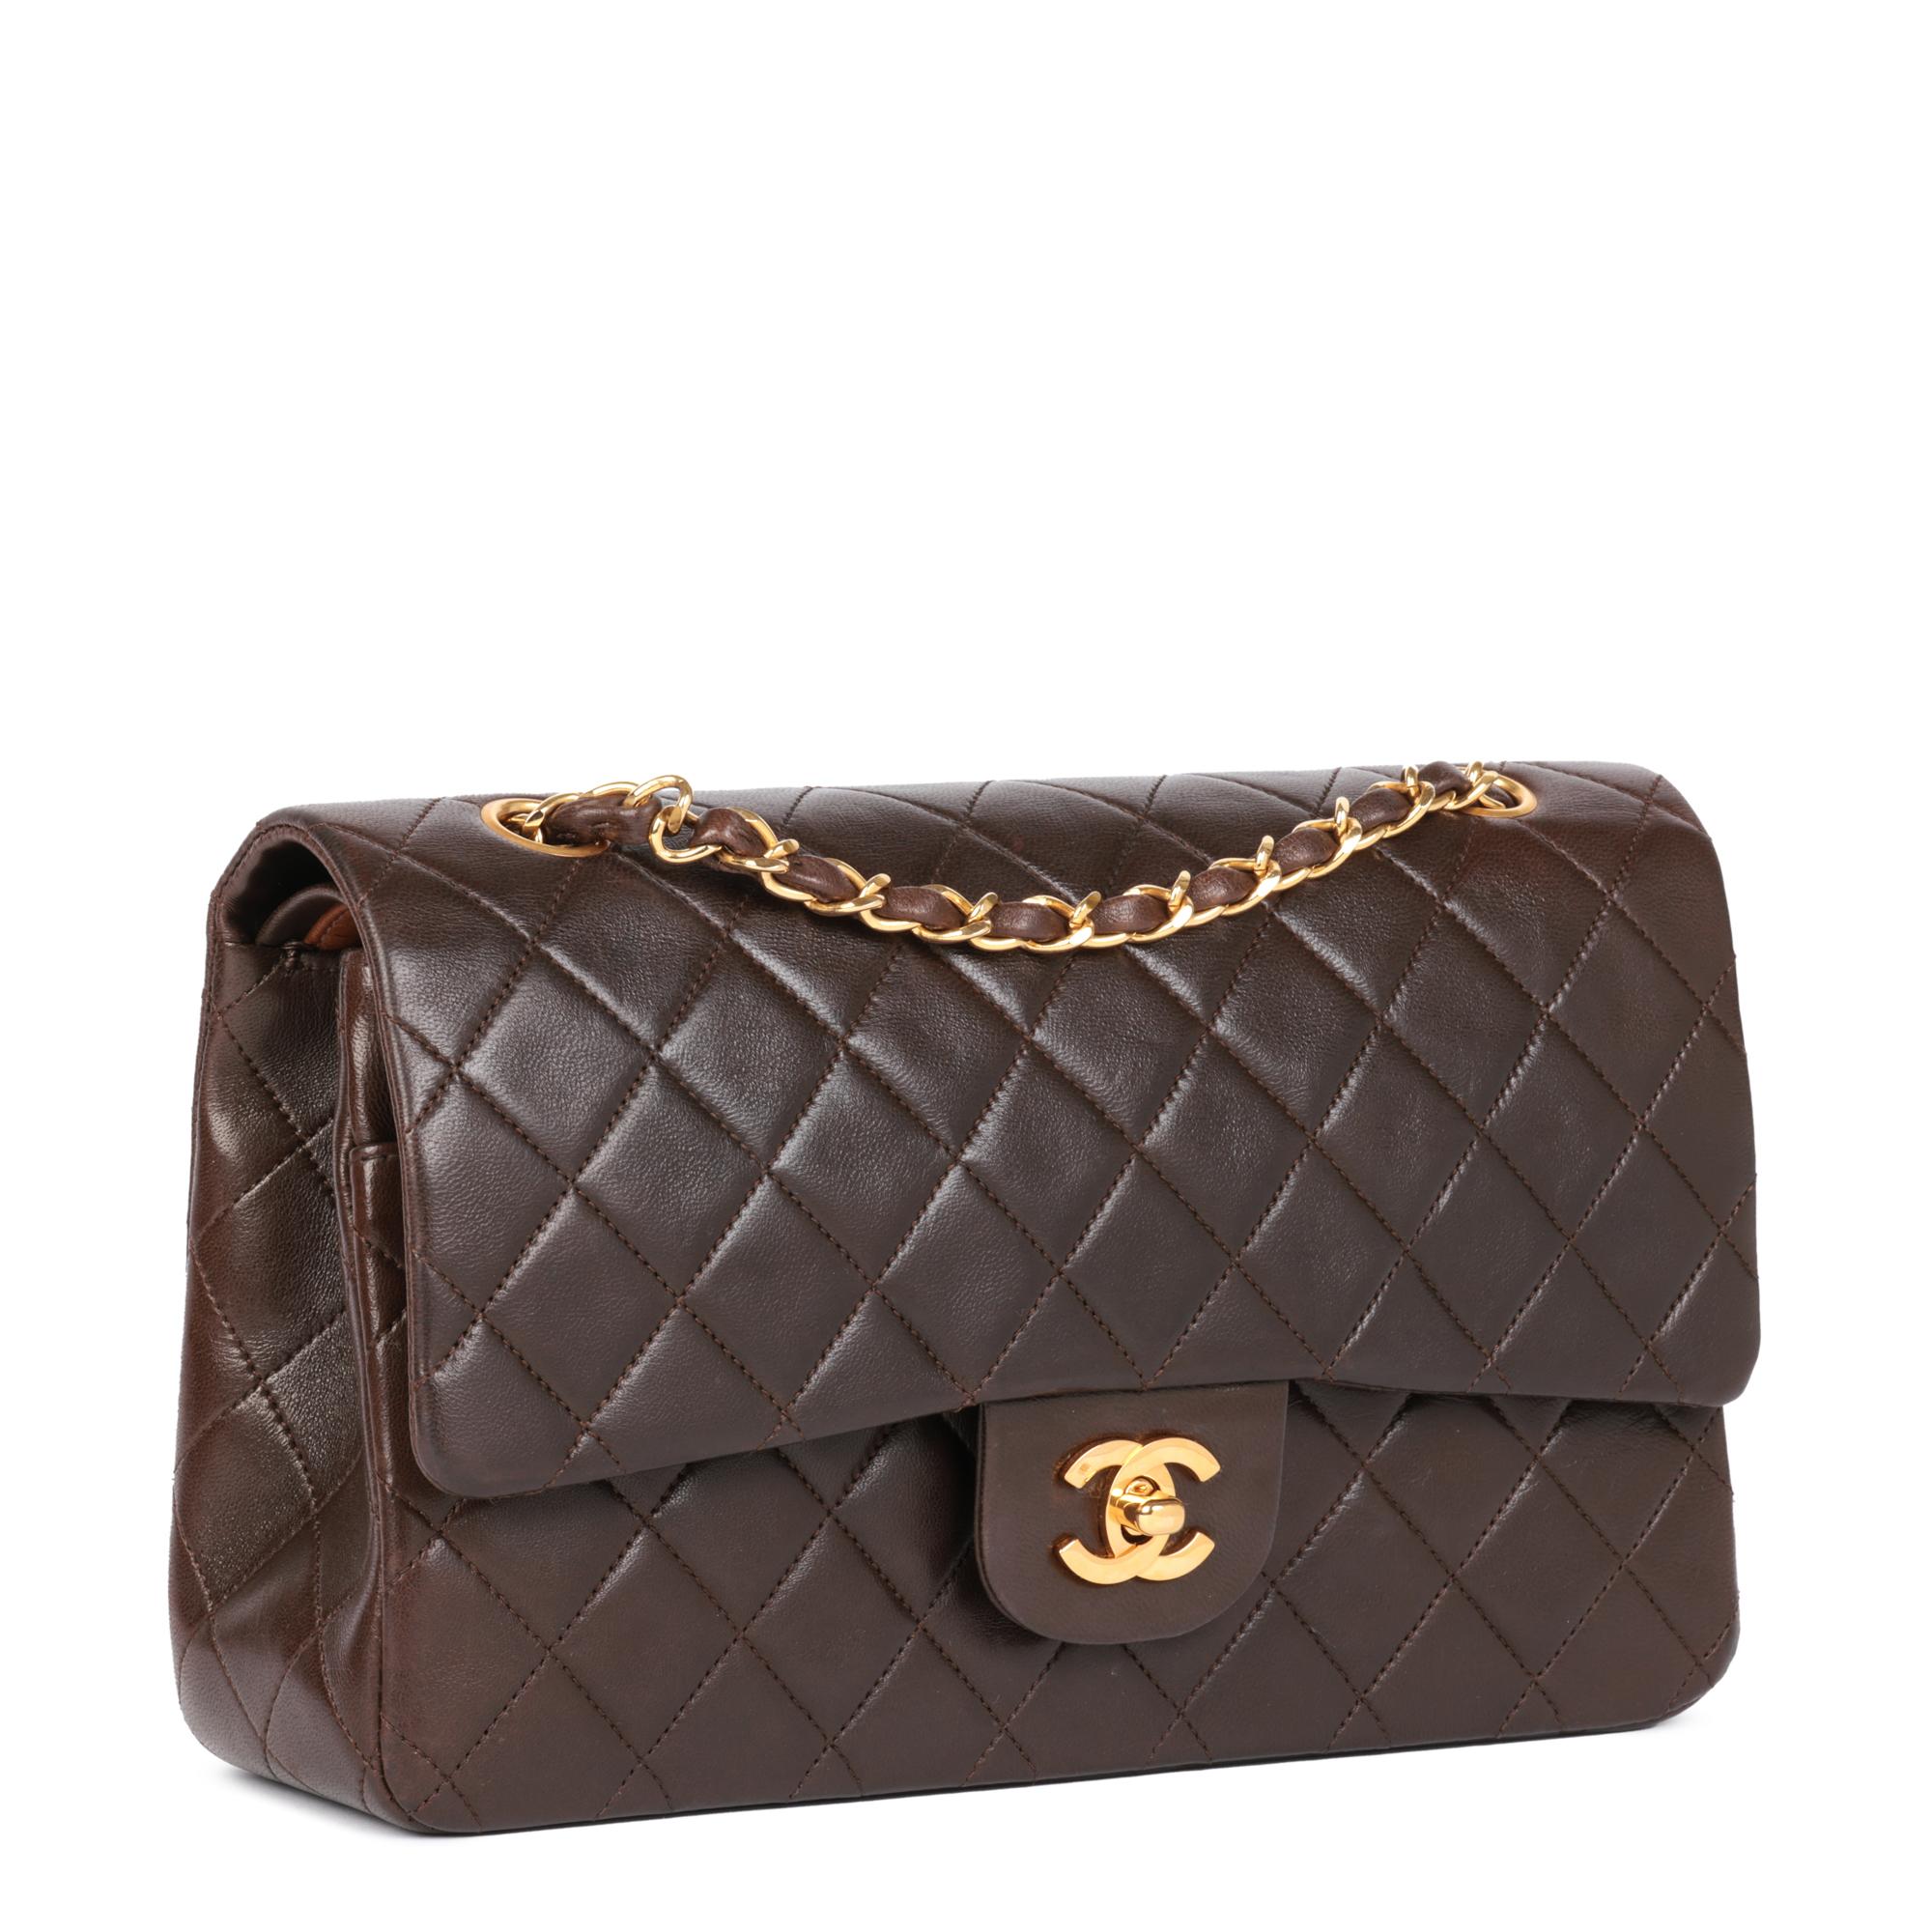 CHANEL
Brown Quilted Lambskin Vintage Medium Classic Double Flap Bag

Serial Number: 1207428
Age (Circa): 1990
Accompanied By: Chanel Dust Bag, Box, Authenticity Card
Authenticity Details: Authenticity Card, Serial Sticker (Made in France)
Gender: